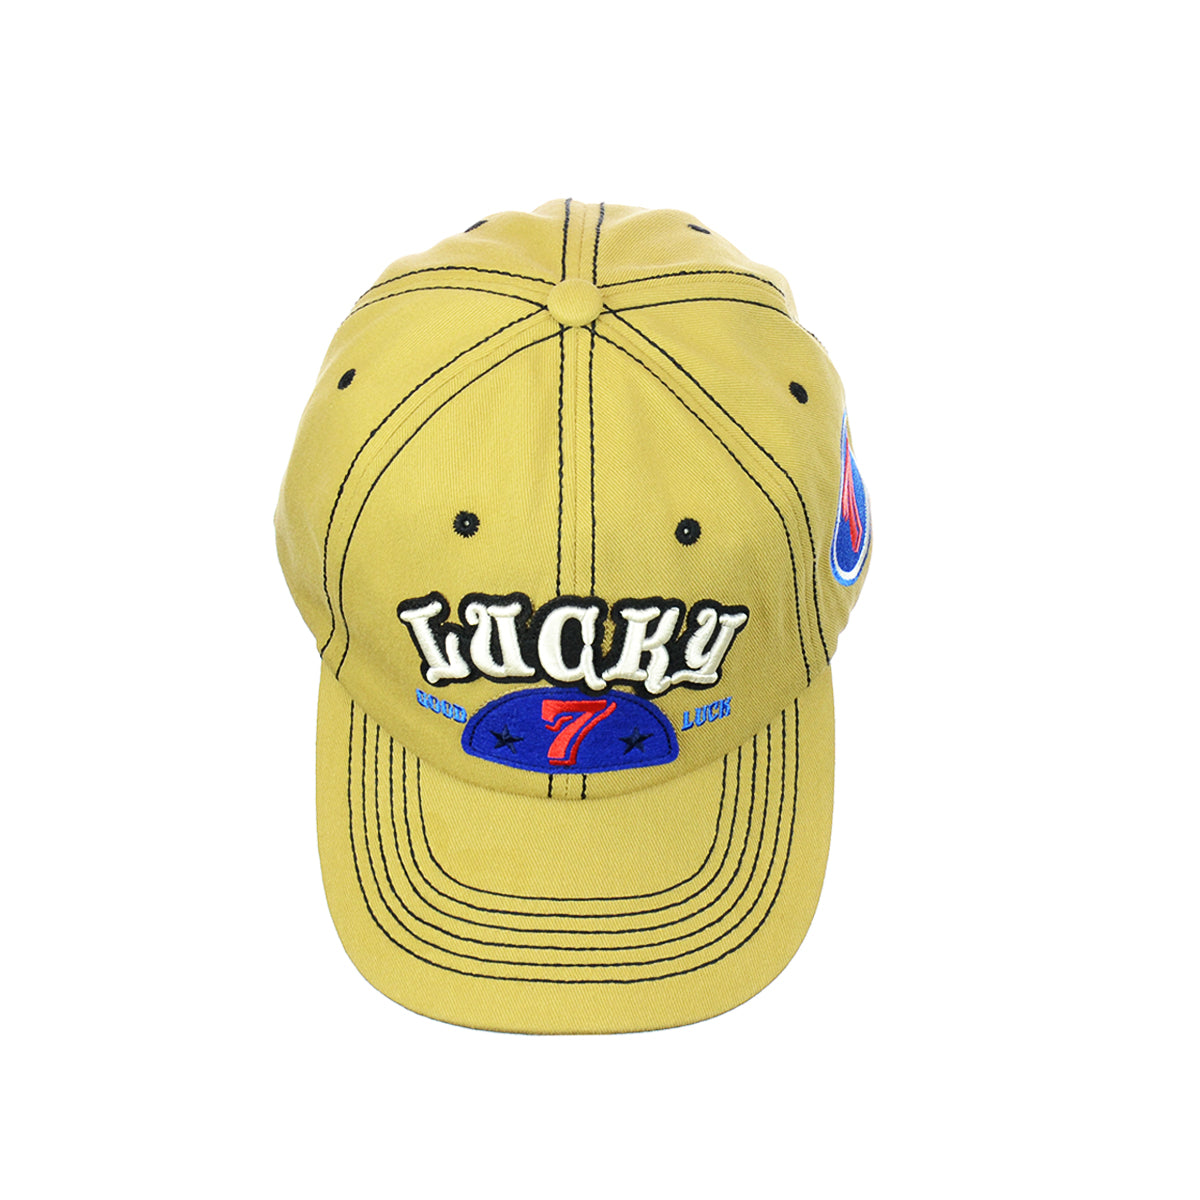 Snapback "LUCKY-7" Hat Embroidered